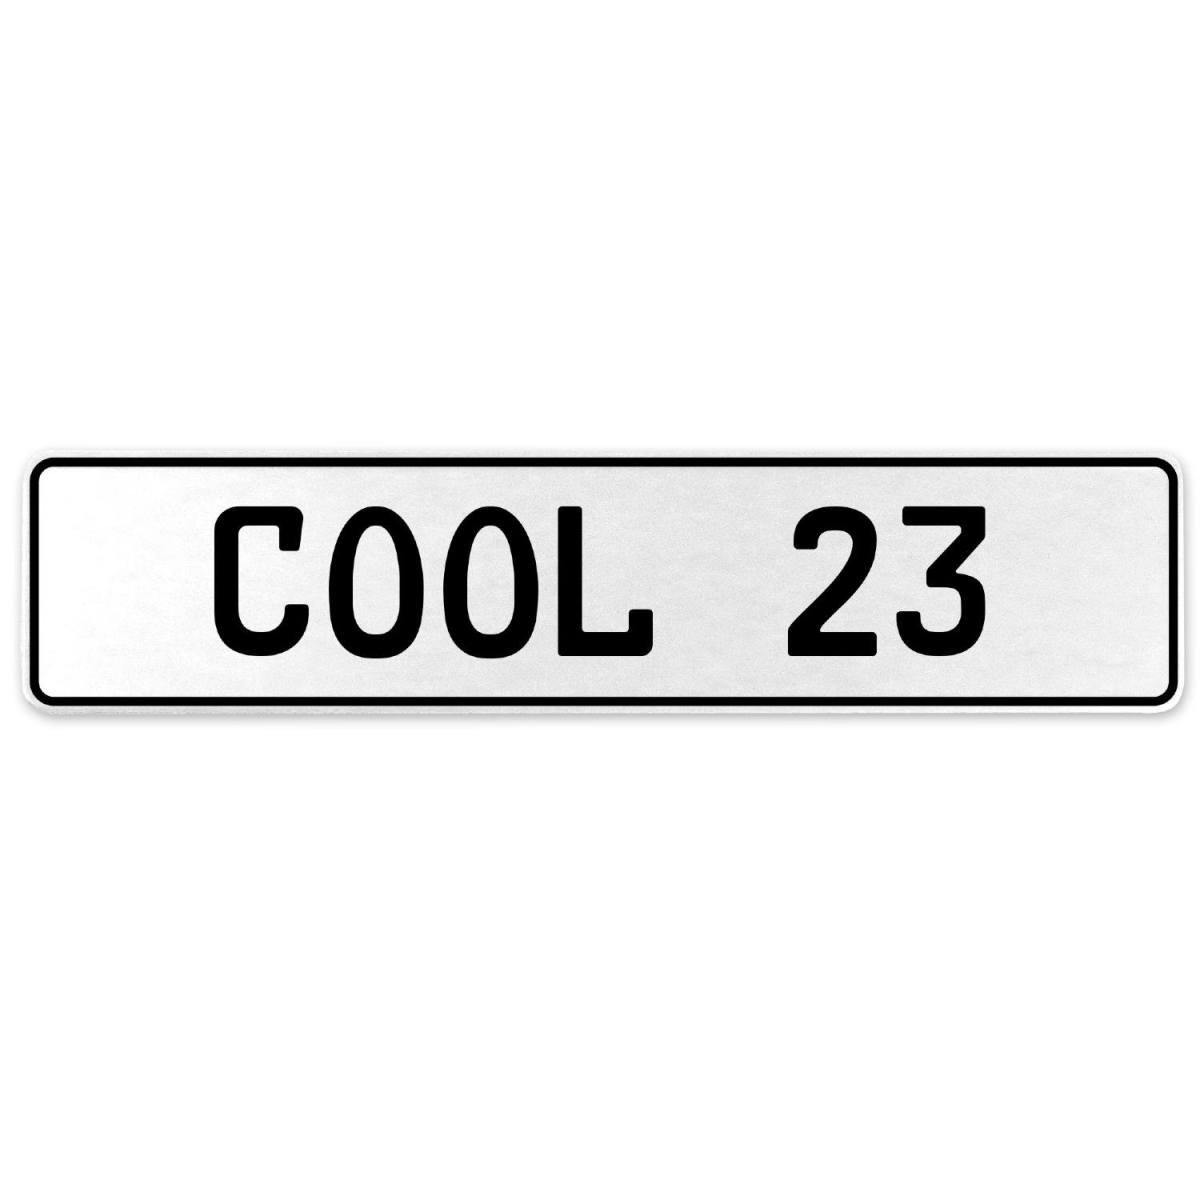 553729 Cool 23 - White Aluminum Street Sign Mancave Euro Plate Name Door Sign Wall